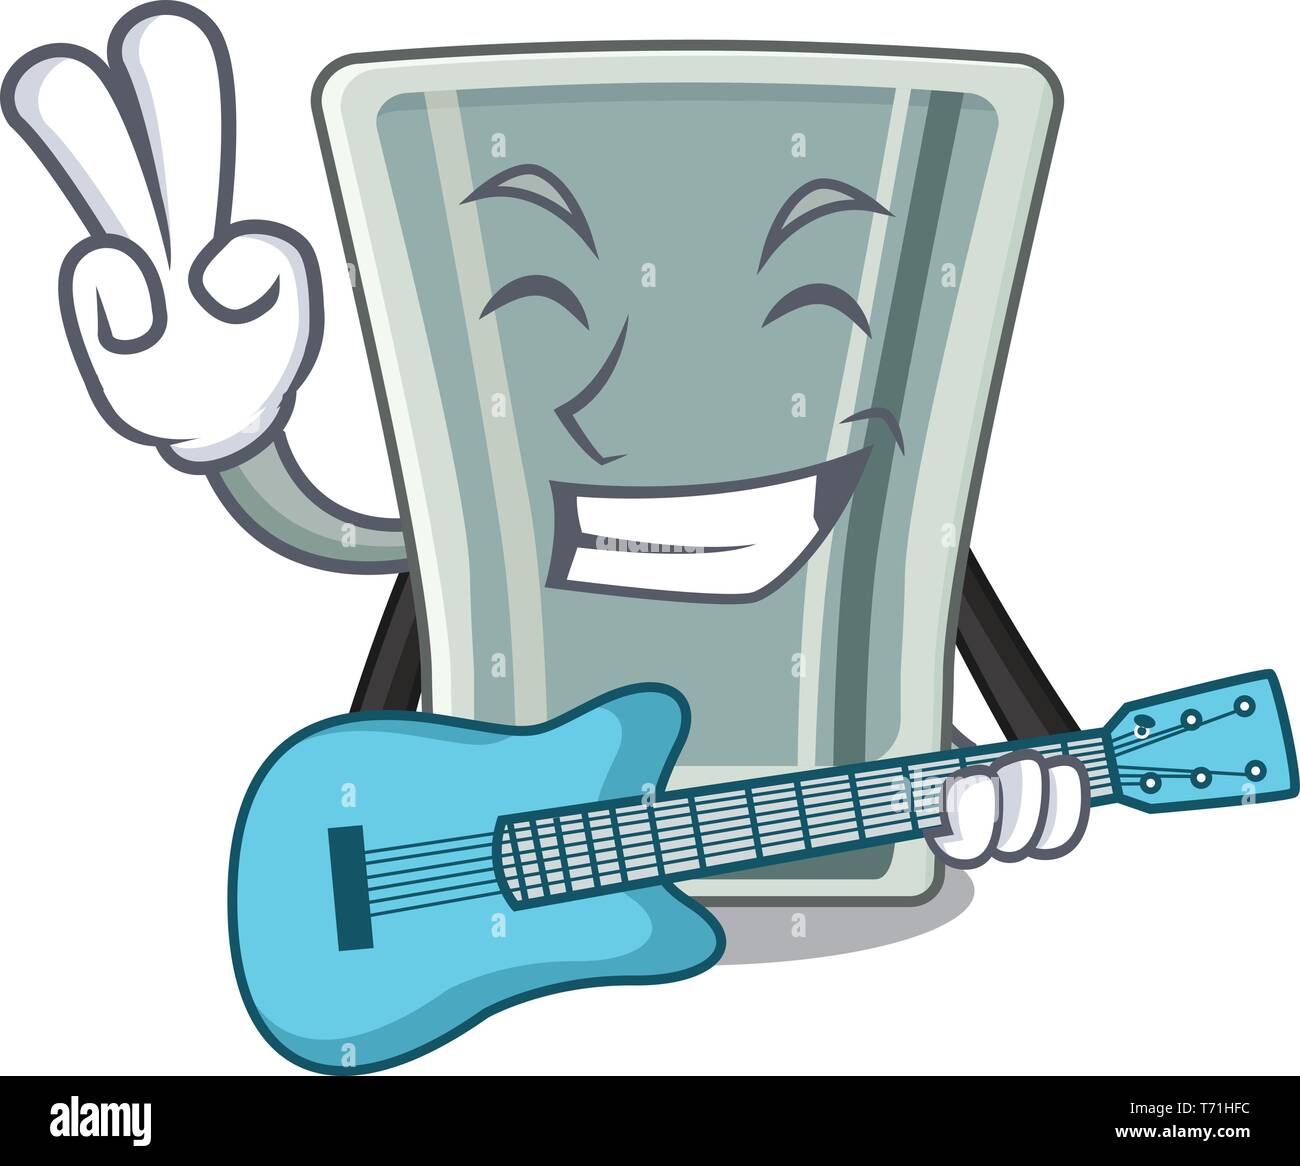 With guitar shot glass character in the fridge Stock Vector